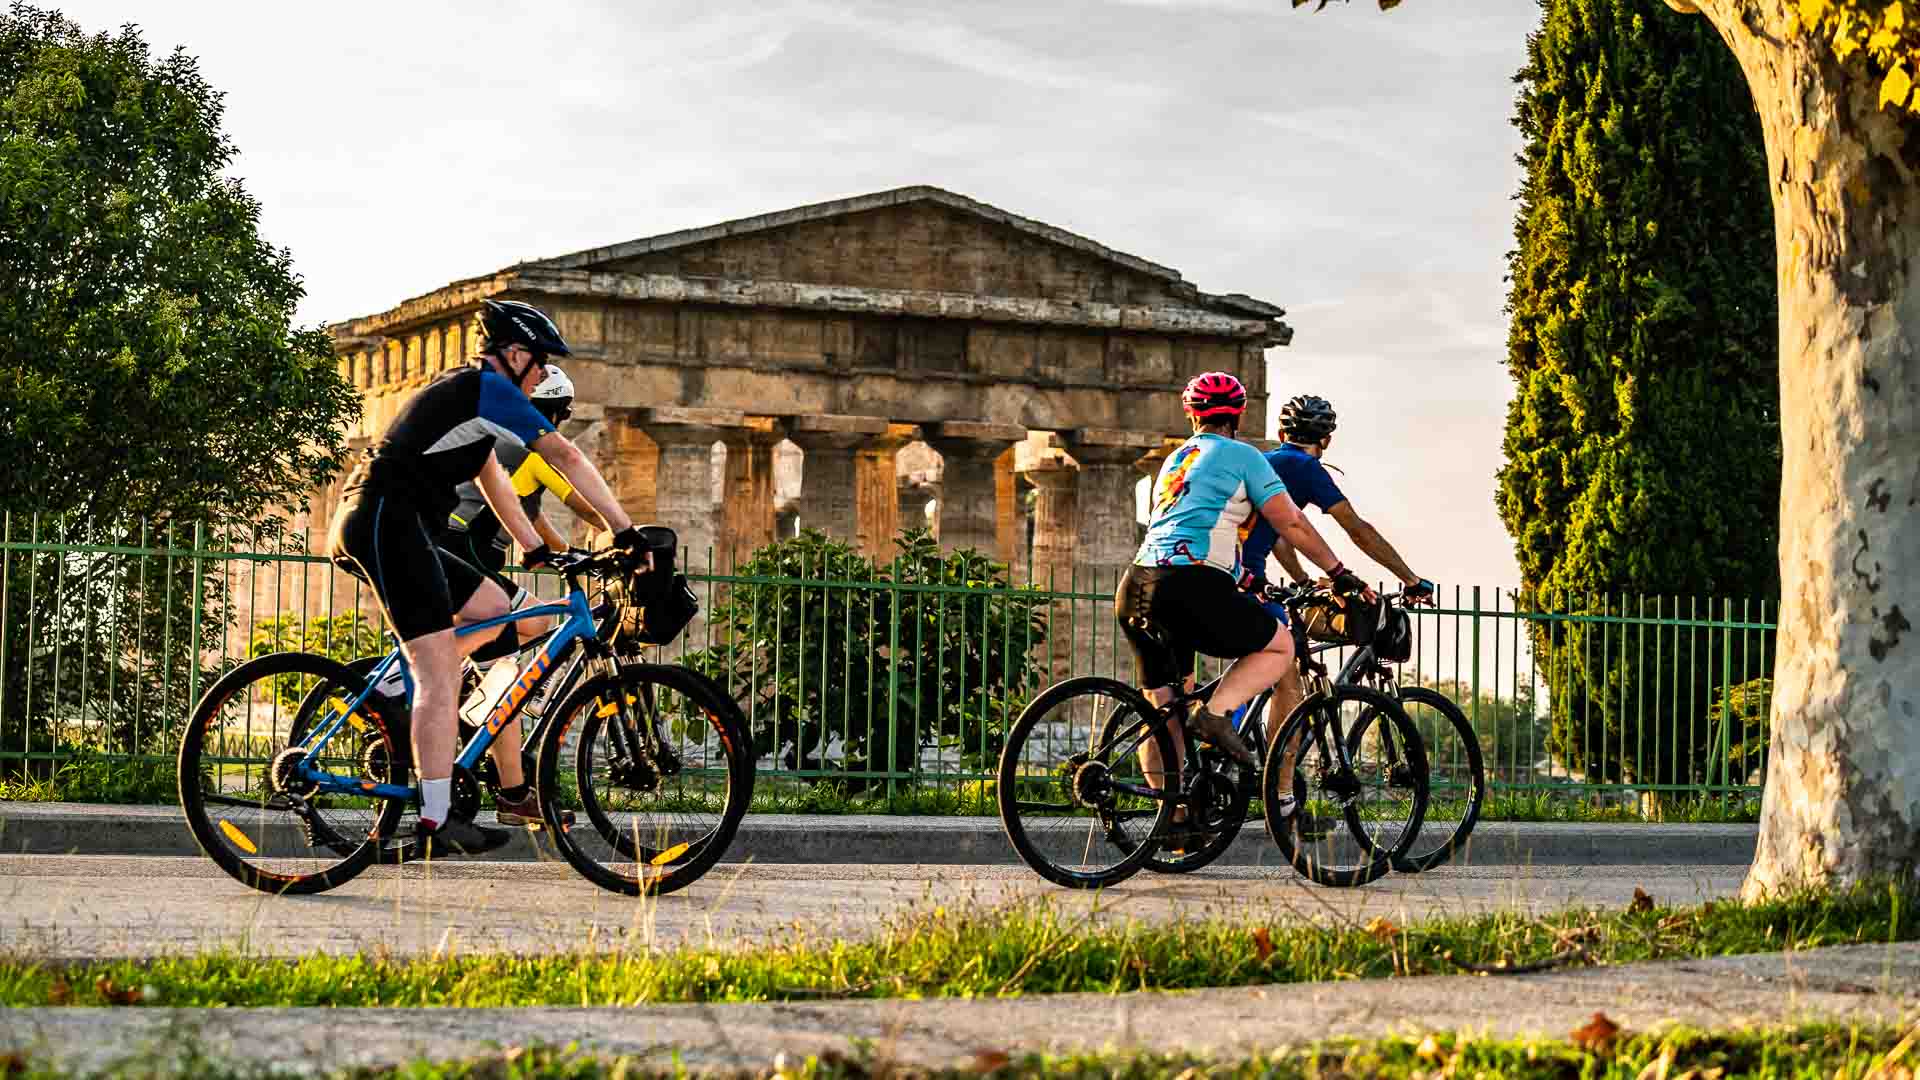 Cyclists at Paestum at dusk